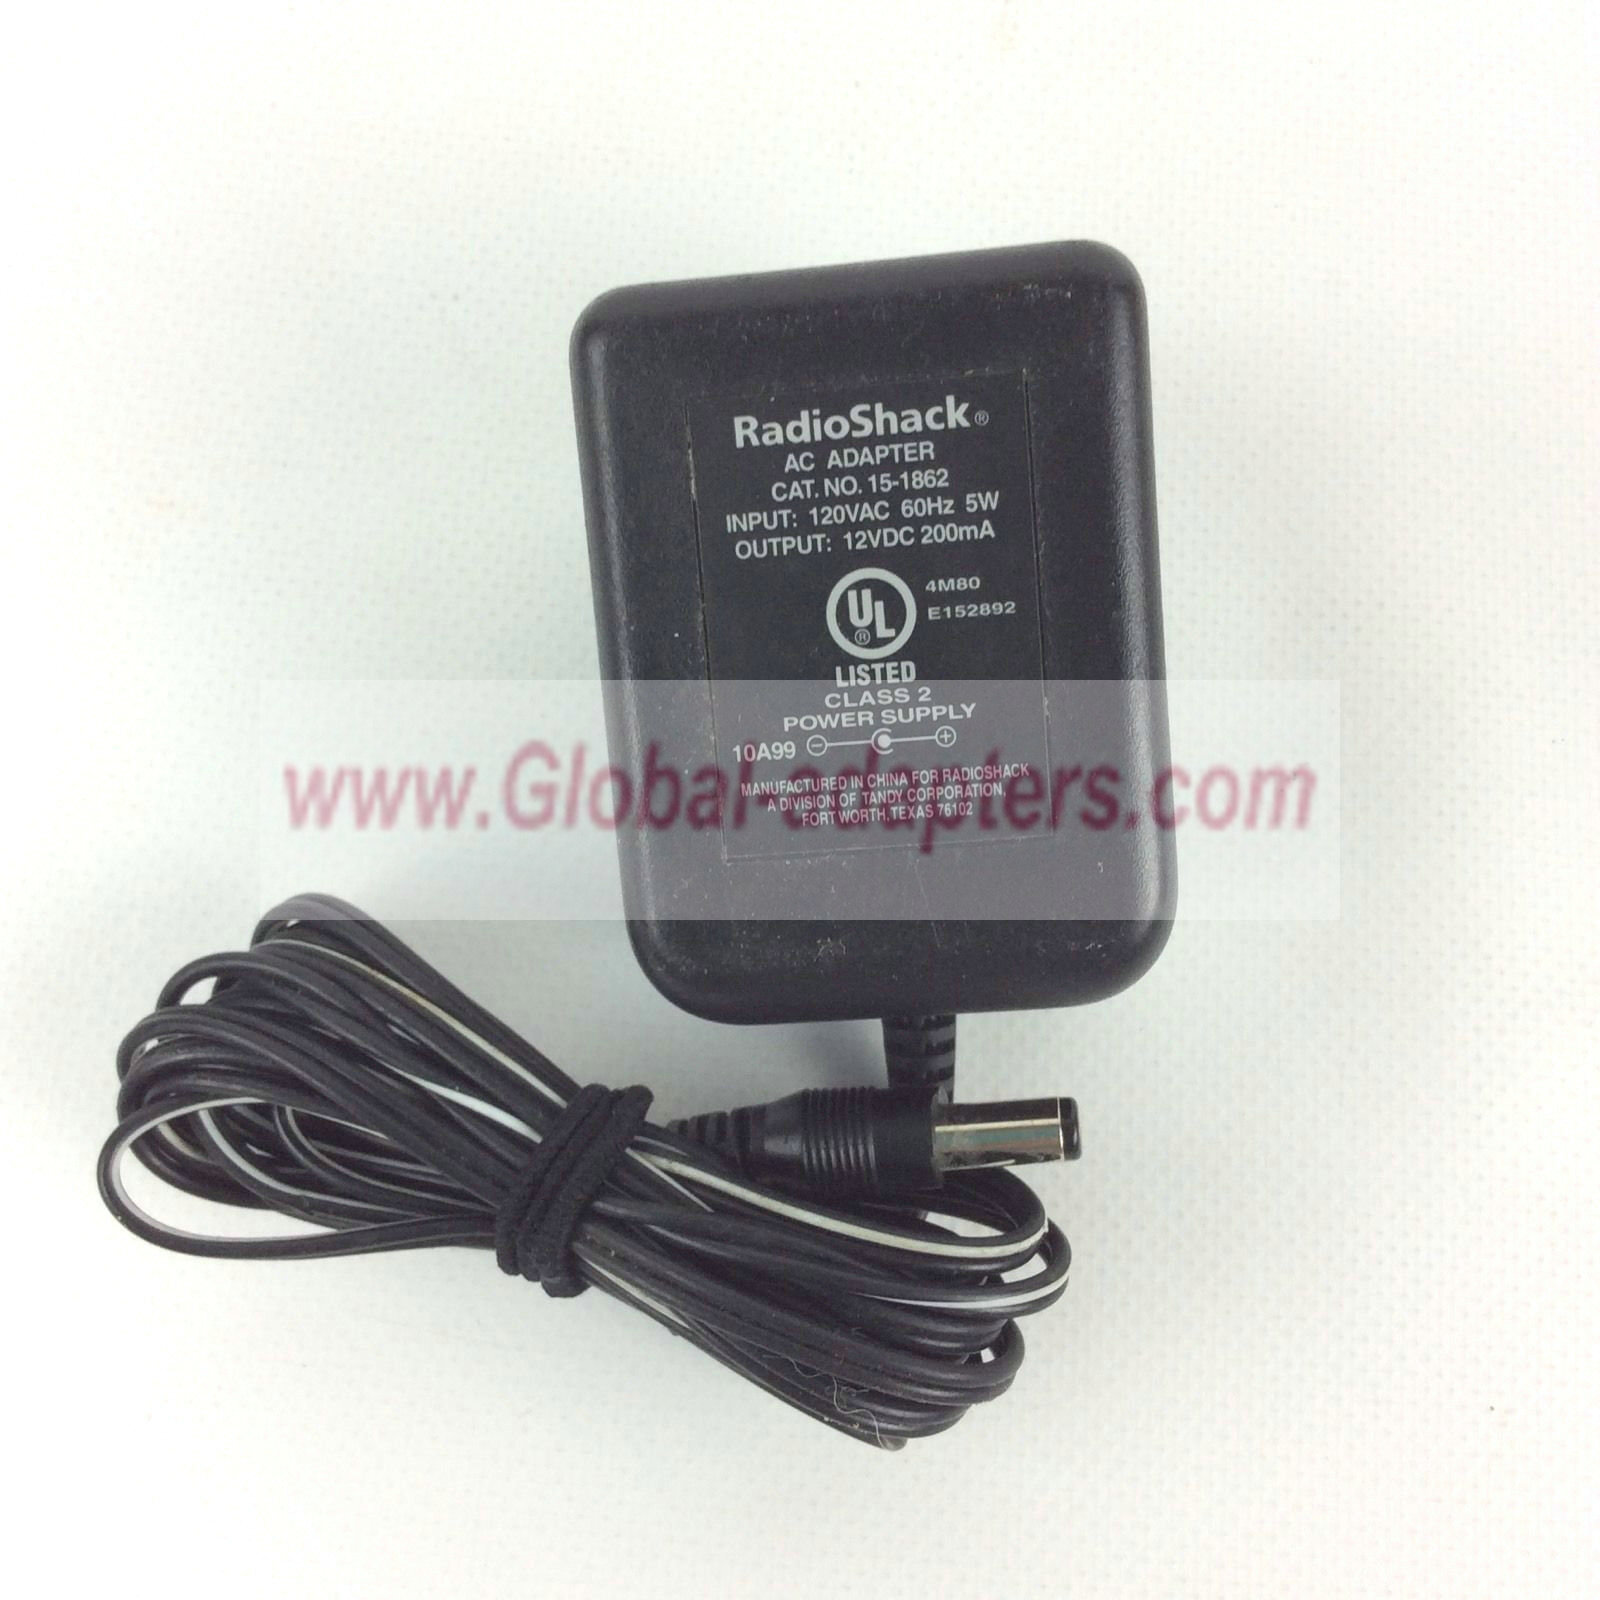 New 12V 200mA Radio Shack 15-1862 Class 2 Power Supply AC Adapter Charger